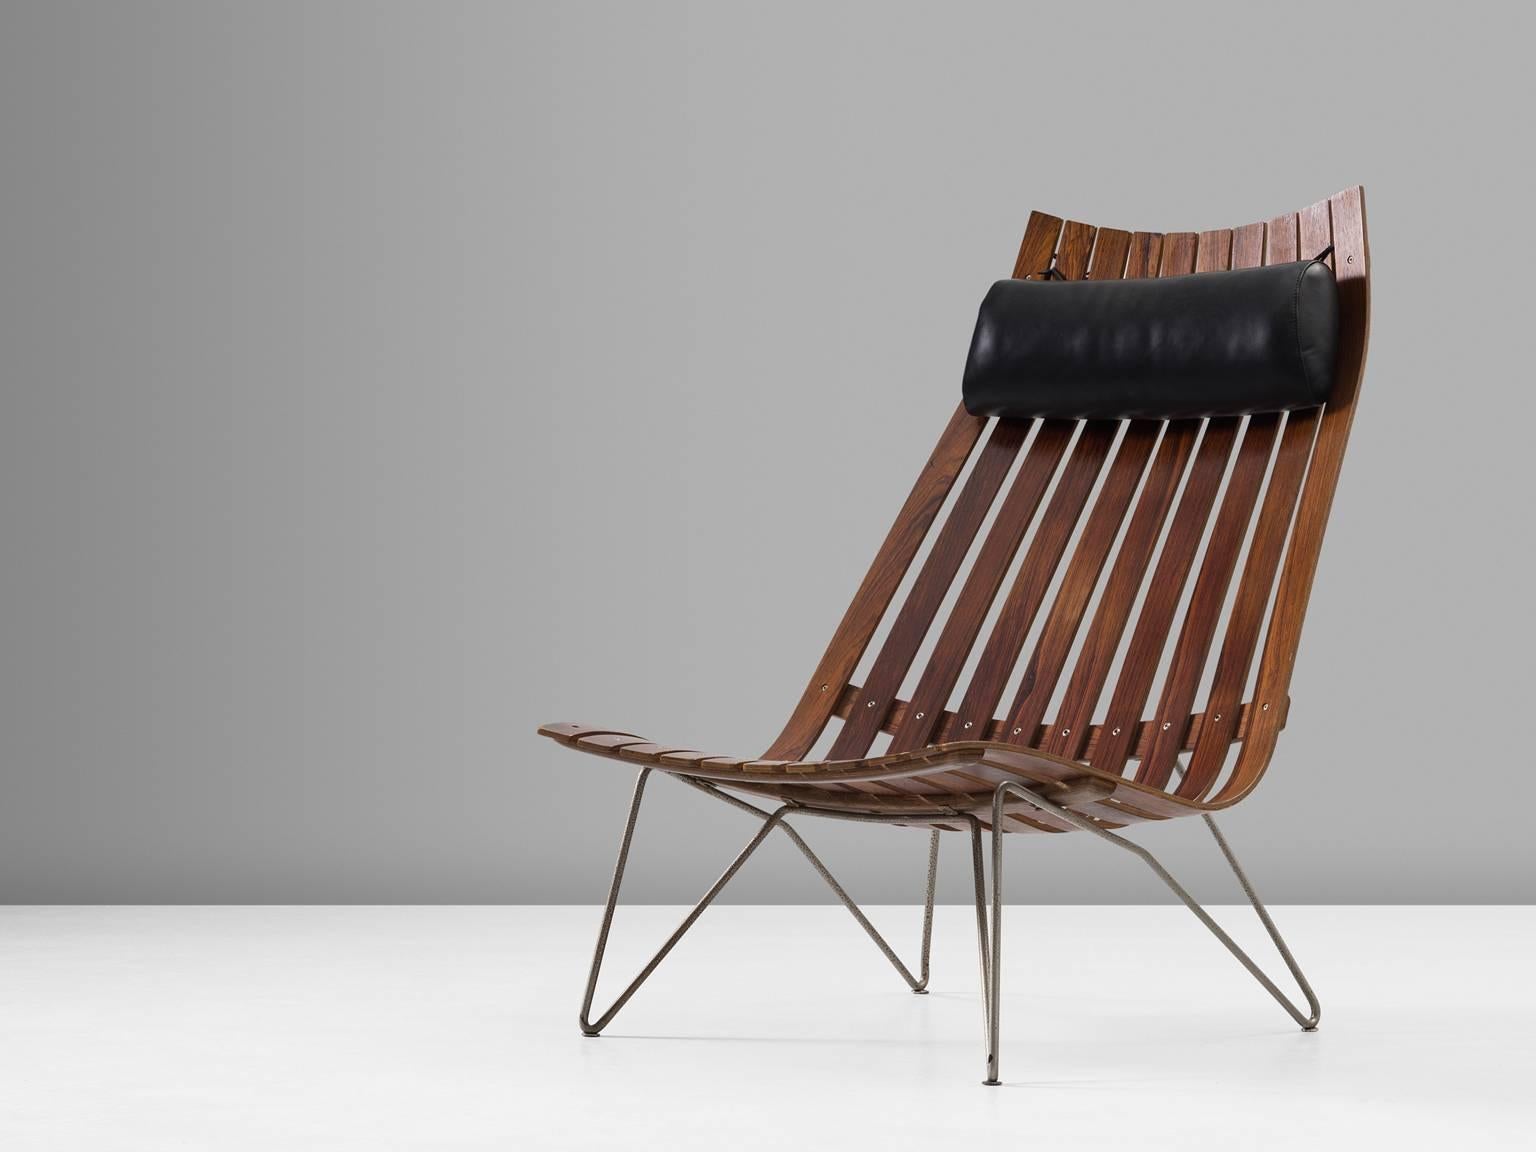 Lounge chair model Scandia, in rosewood and metal, by Hans Brattrud for Hove Mobler, Norway, circa 1957. 

Elegant and modern lounge chair in warm rosewood. This slatted chair shows an interesting 'hairpin' frame of one piece of bent metal. The